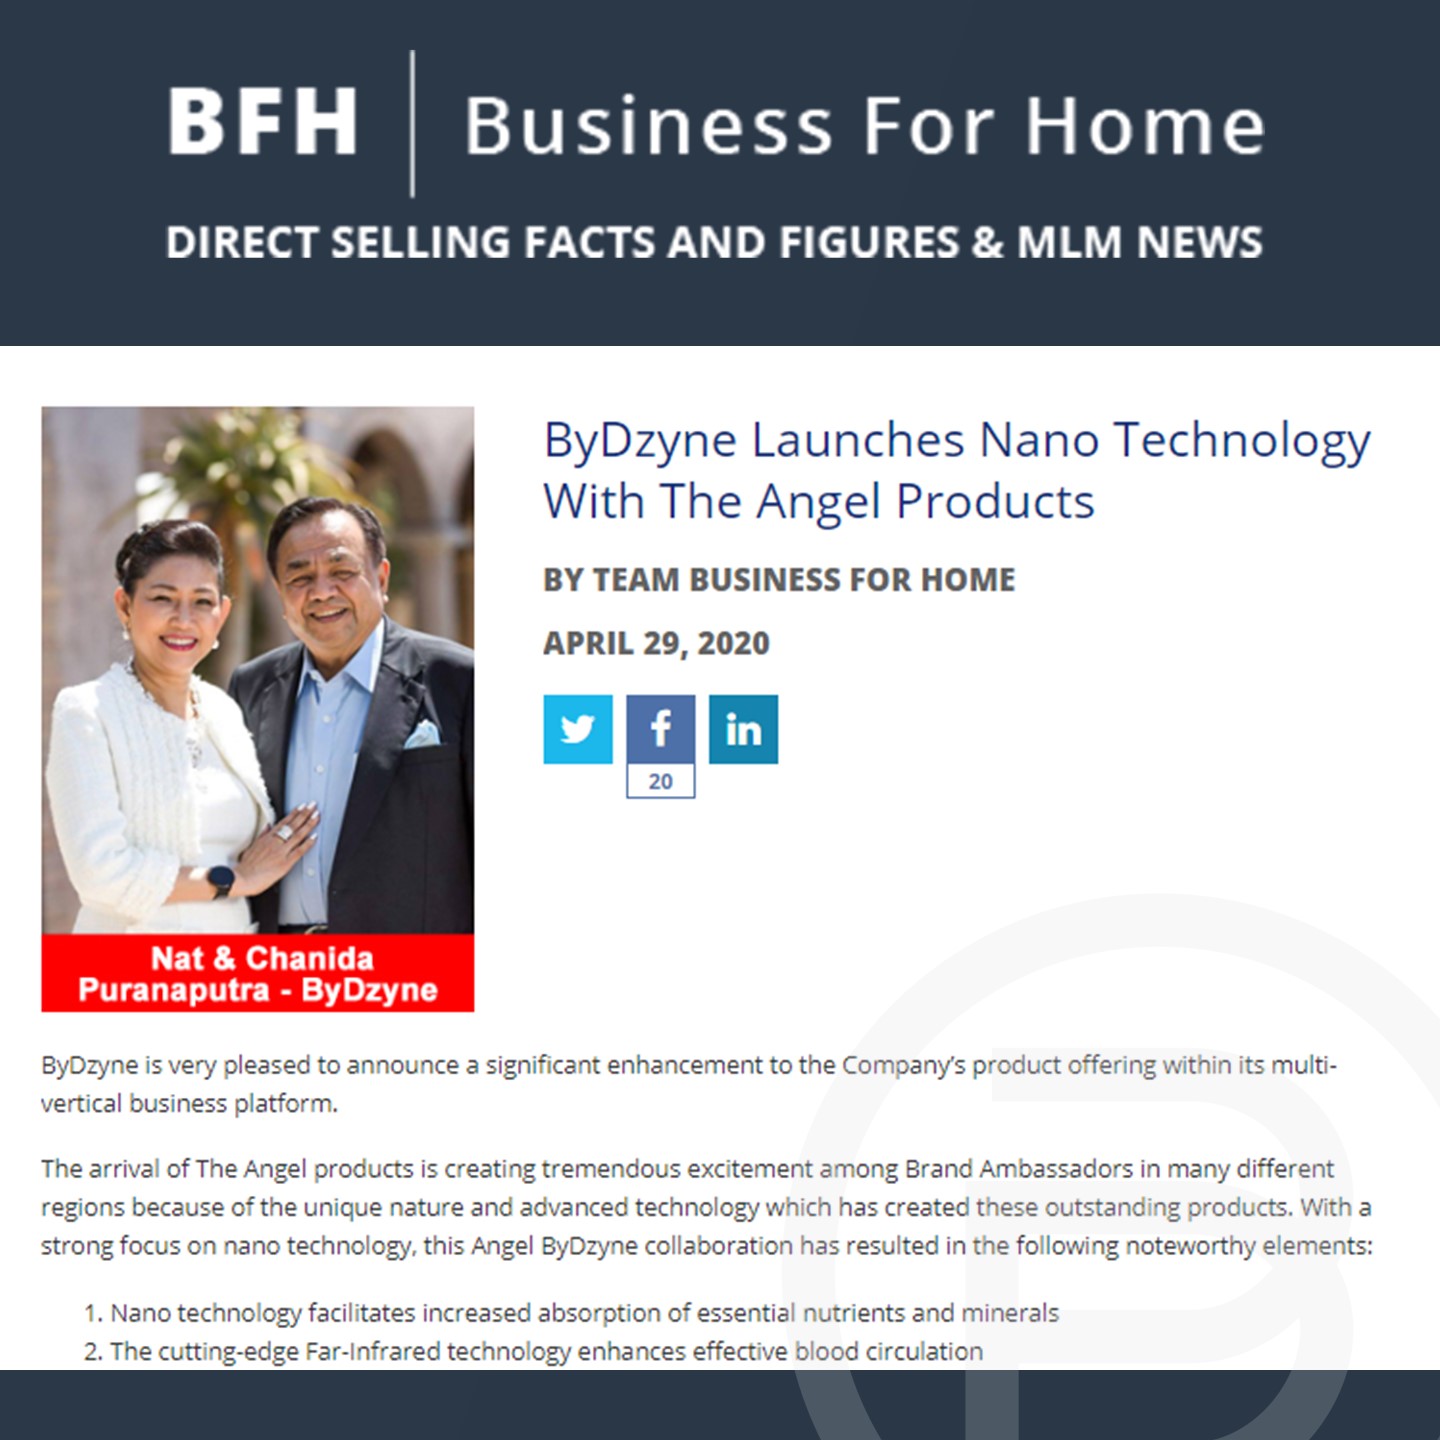 BFH: ByDzyne Launches Nano Technology With The Angel Products